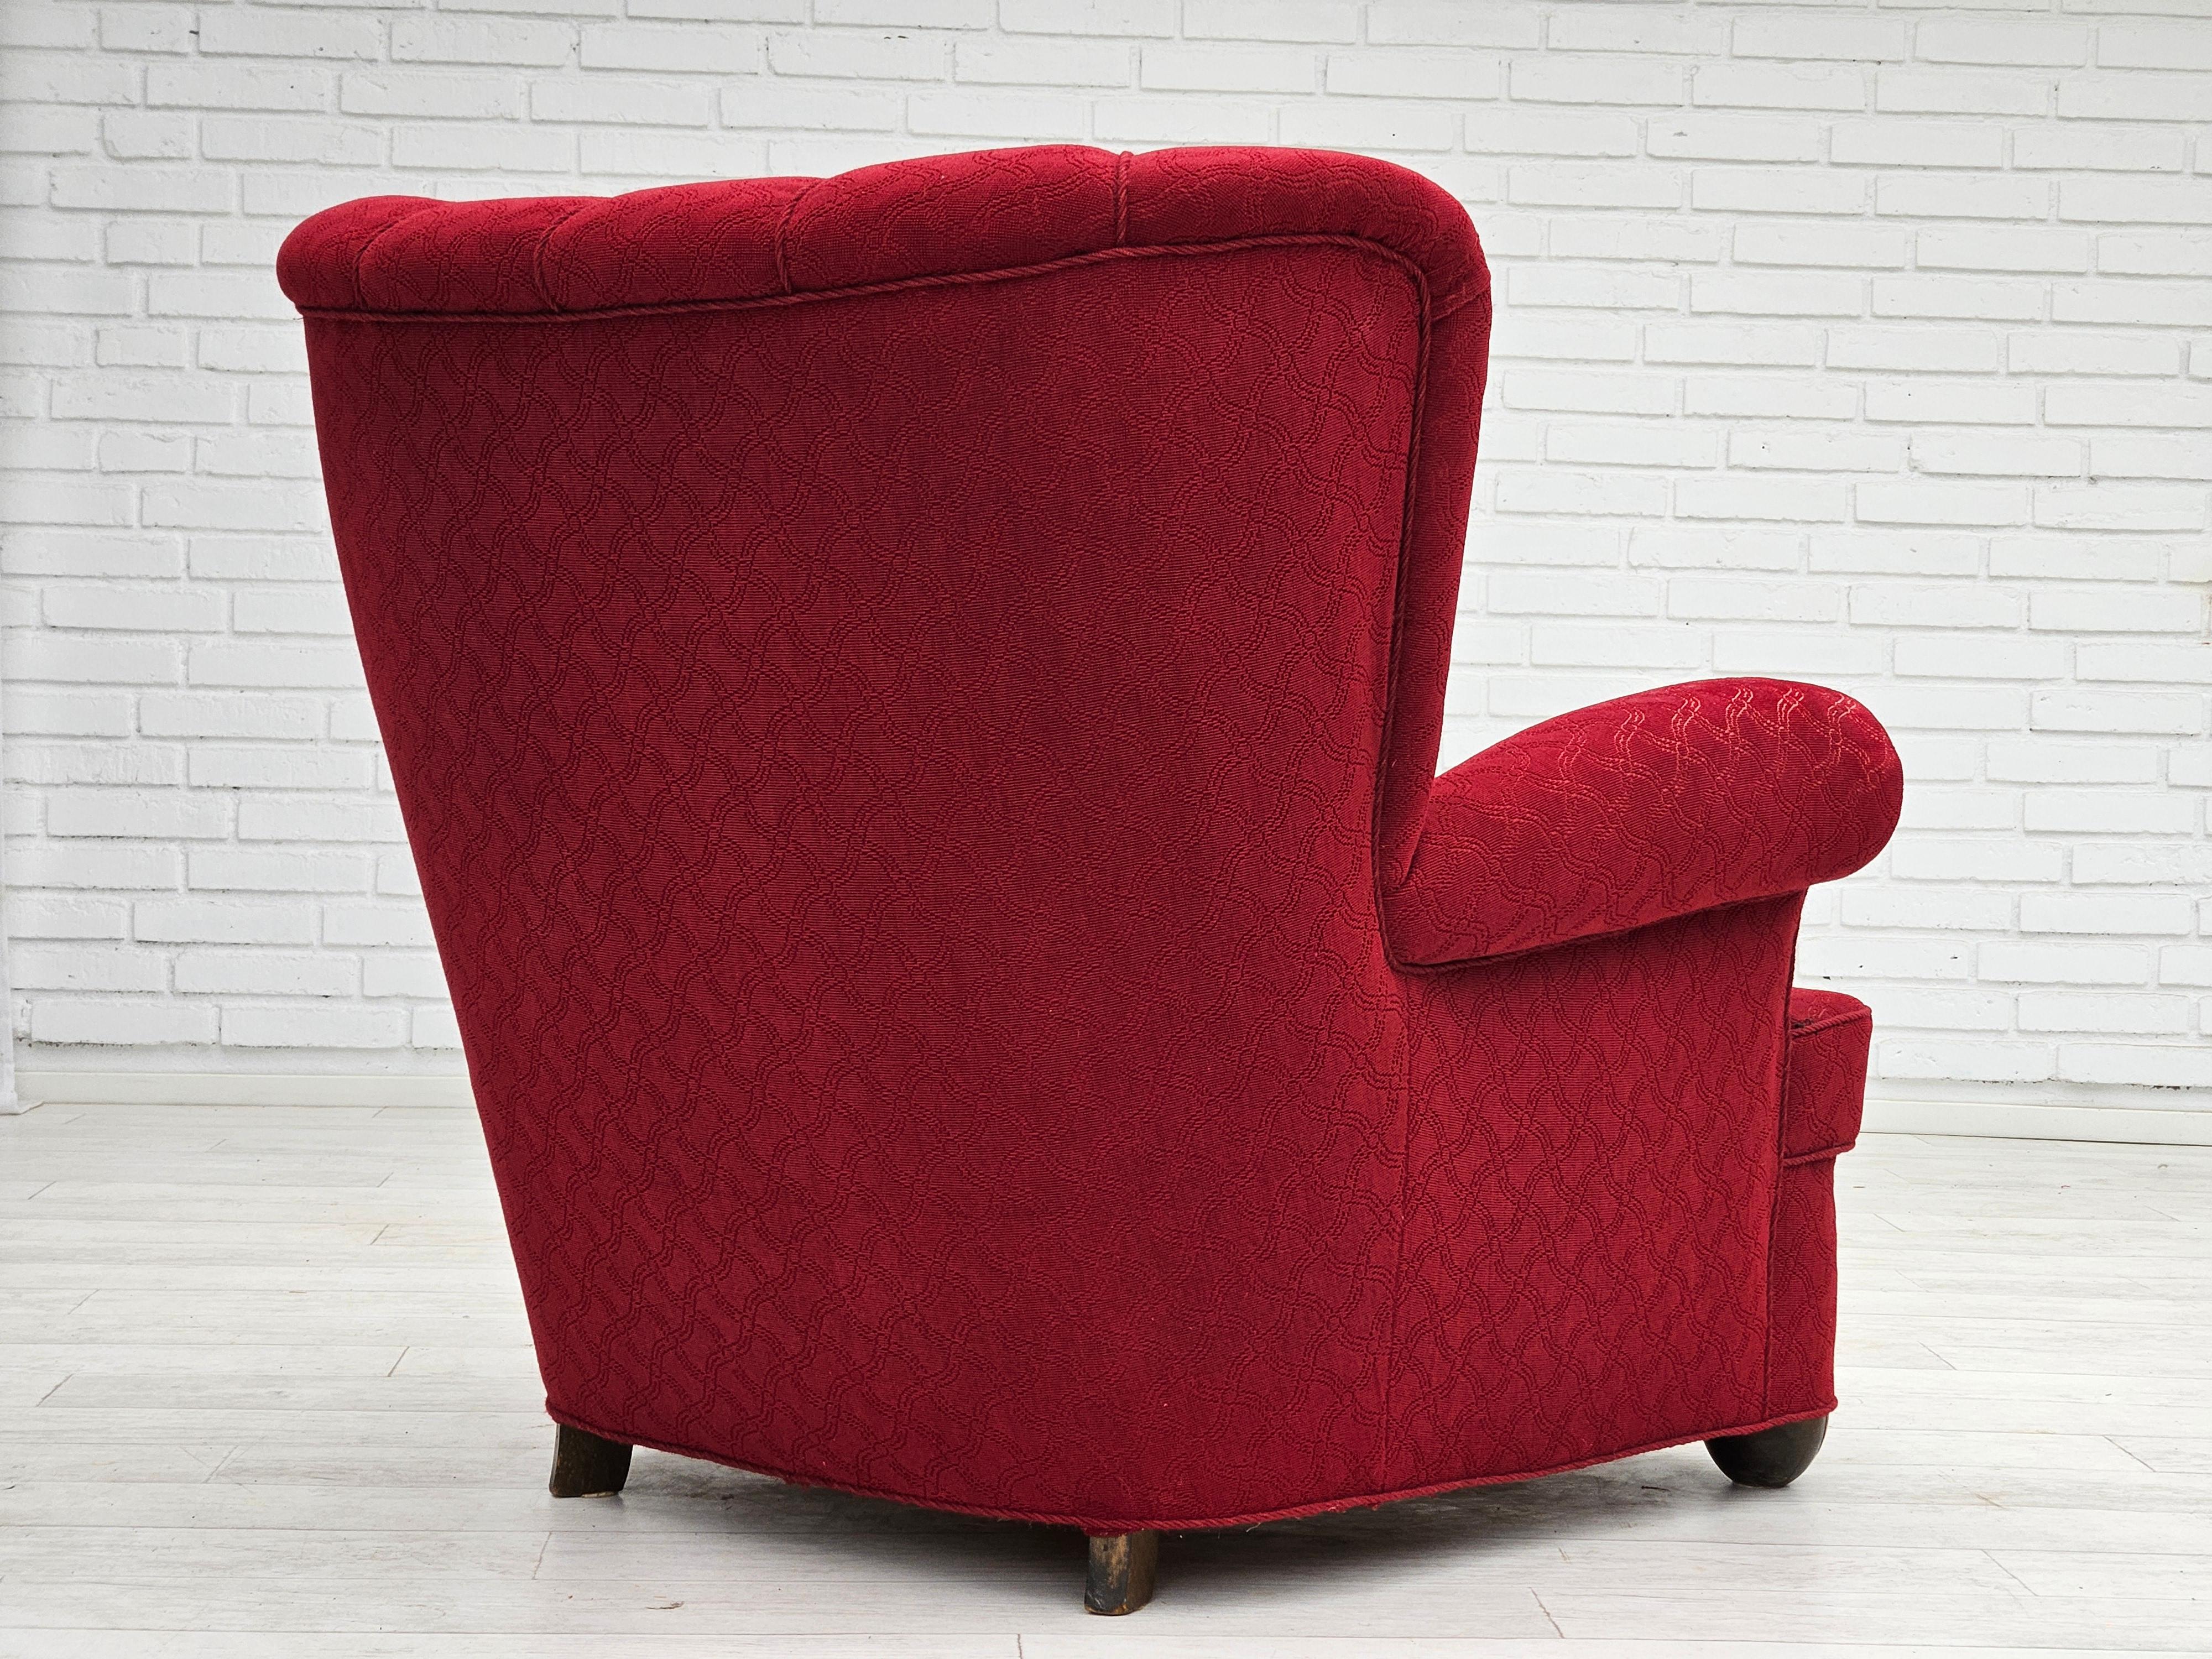 Wool 1960s, Danish relax armchair, original condition, red cotton/wool, oak wood. For Sale